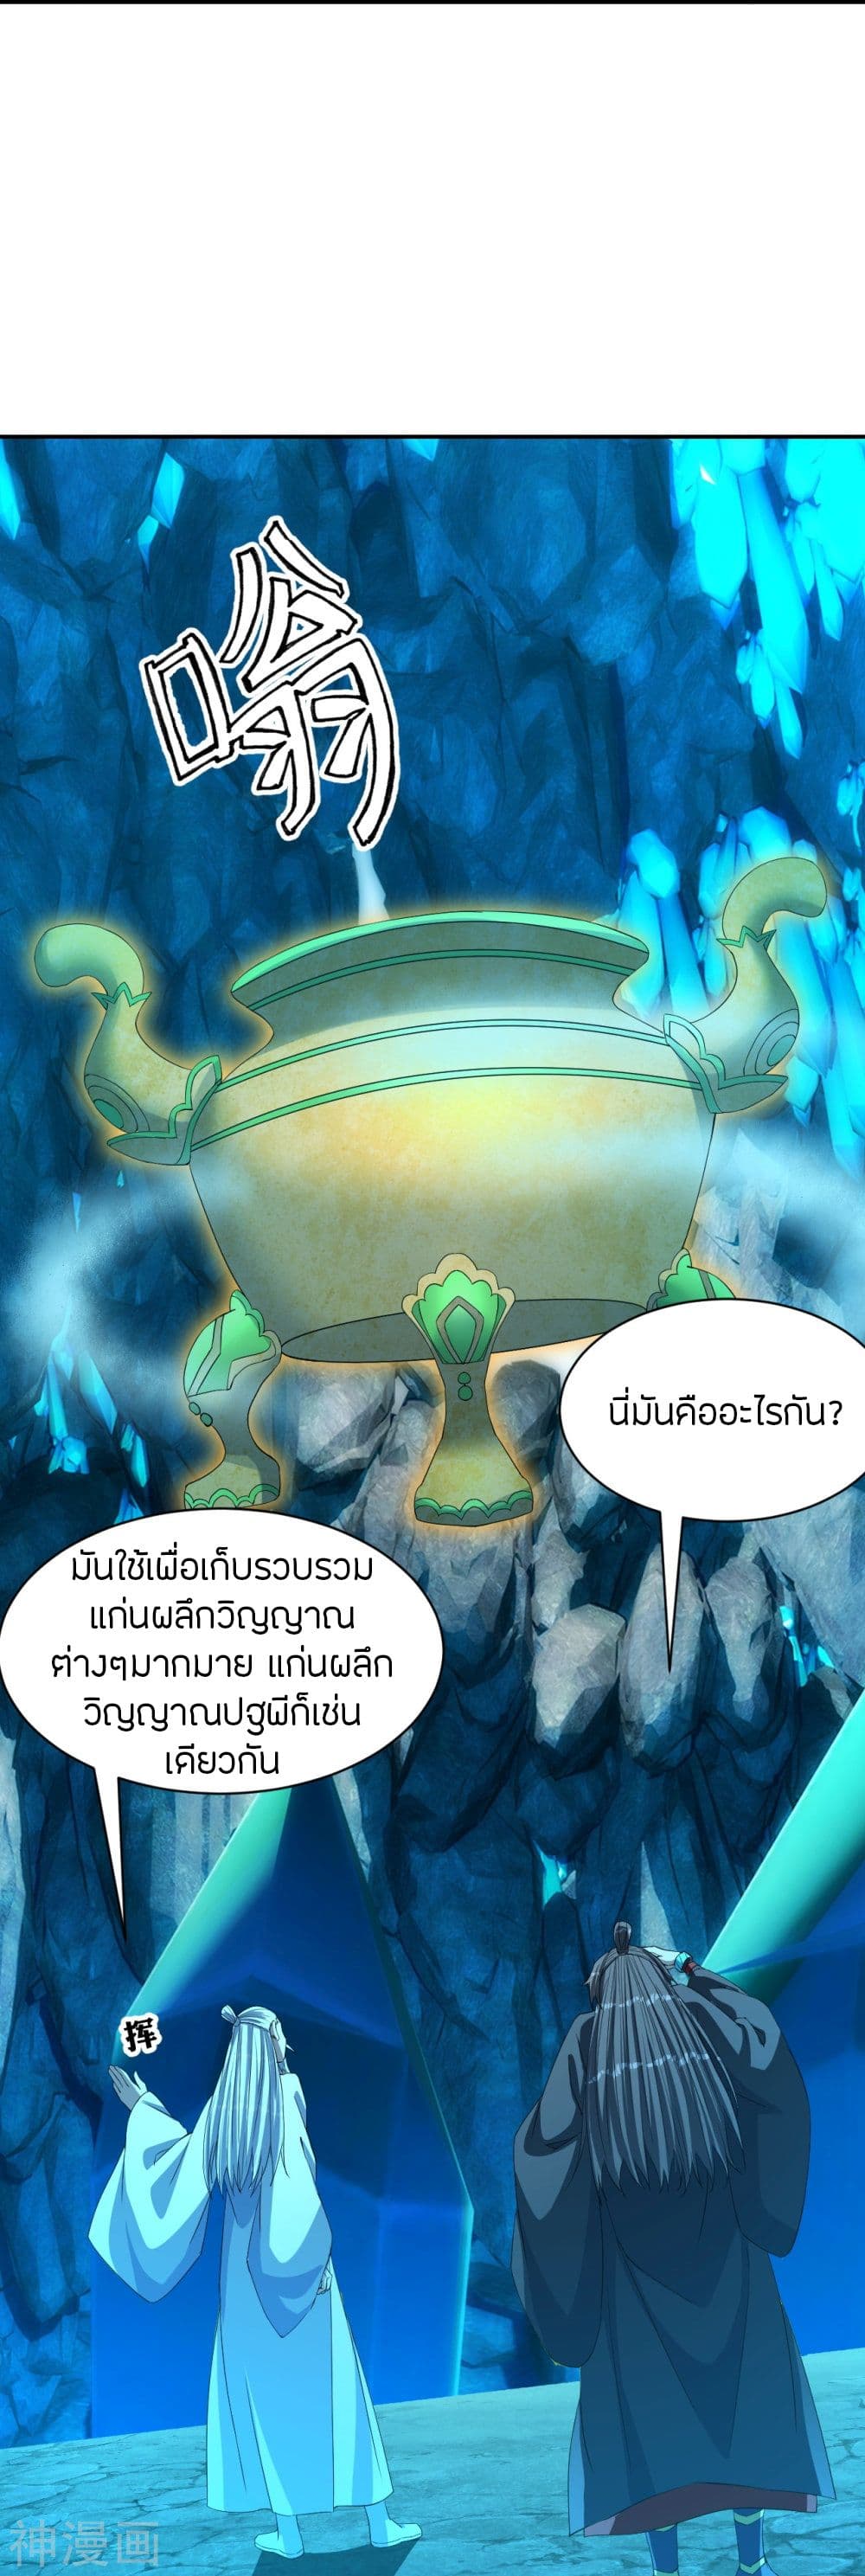 Banished Disciple's Counterattack เธเธฑเธเธฃเธเธฃเธฃเธ”เธดเน€เธเธตเธขเธเธขเธธเธ—เธ 239 (53)